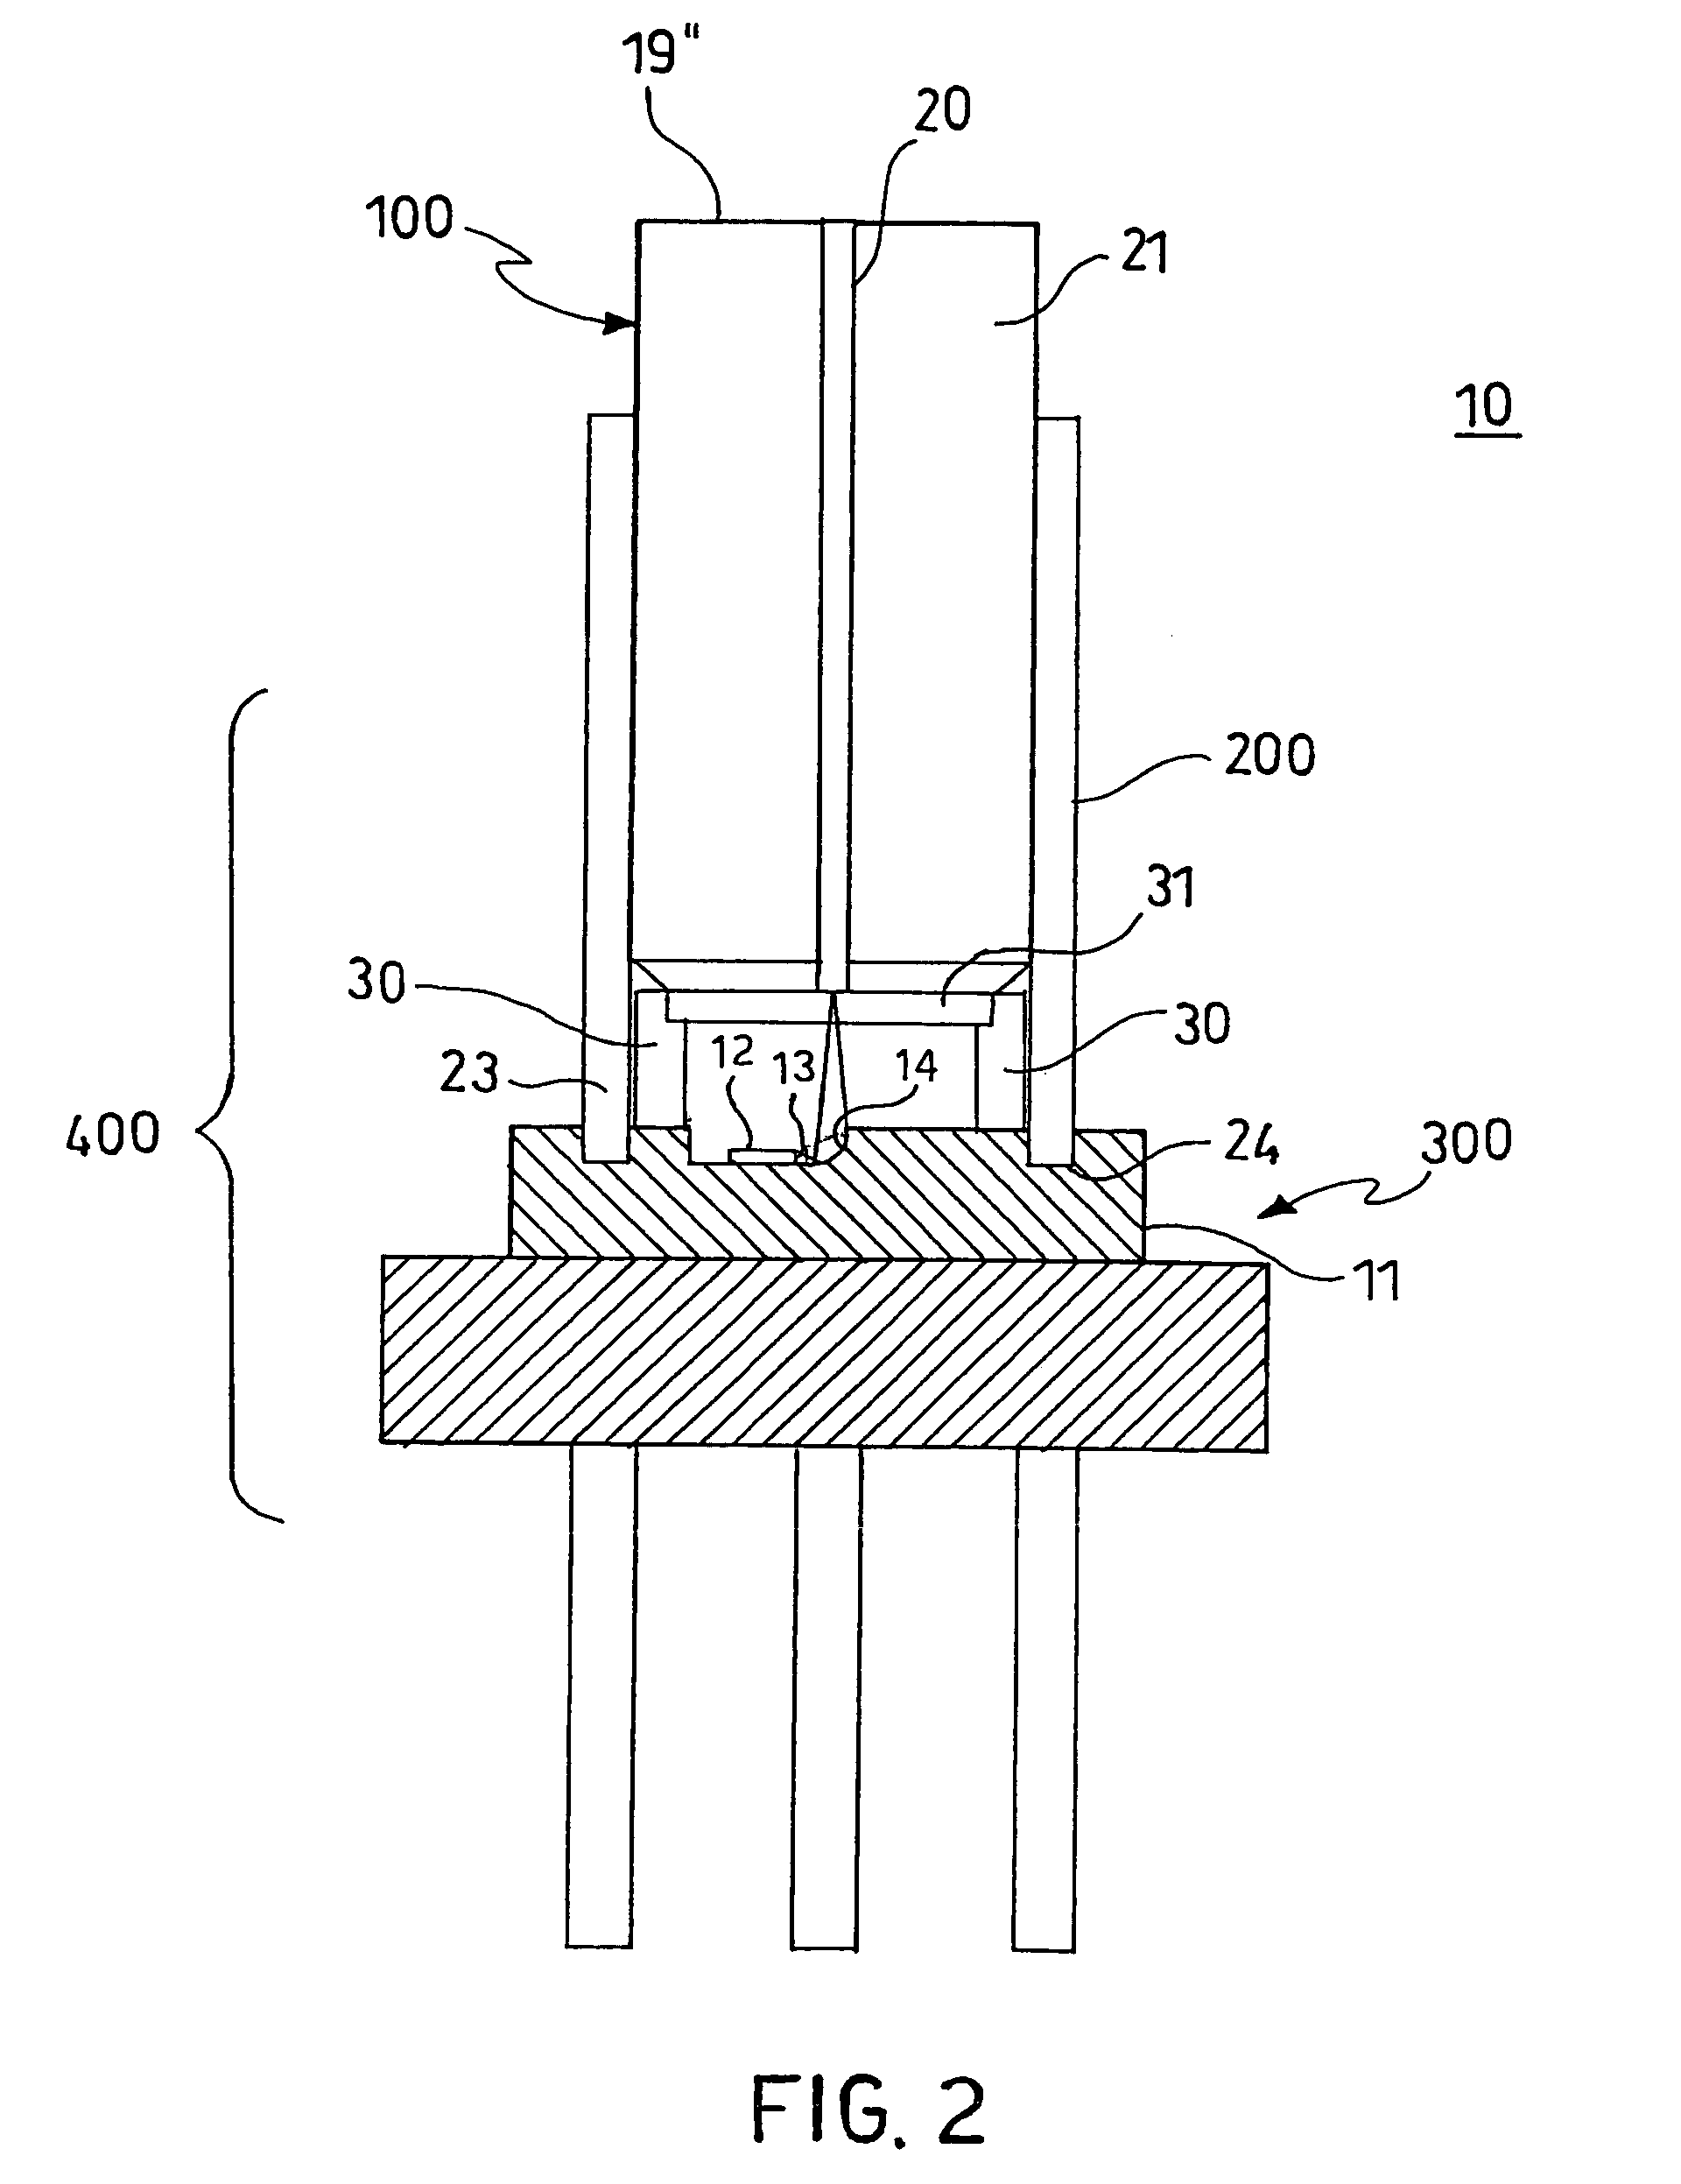 Optical module including an optoelectronic device